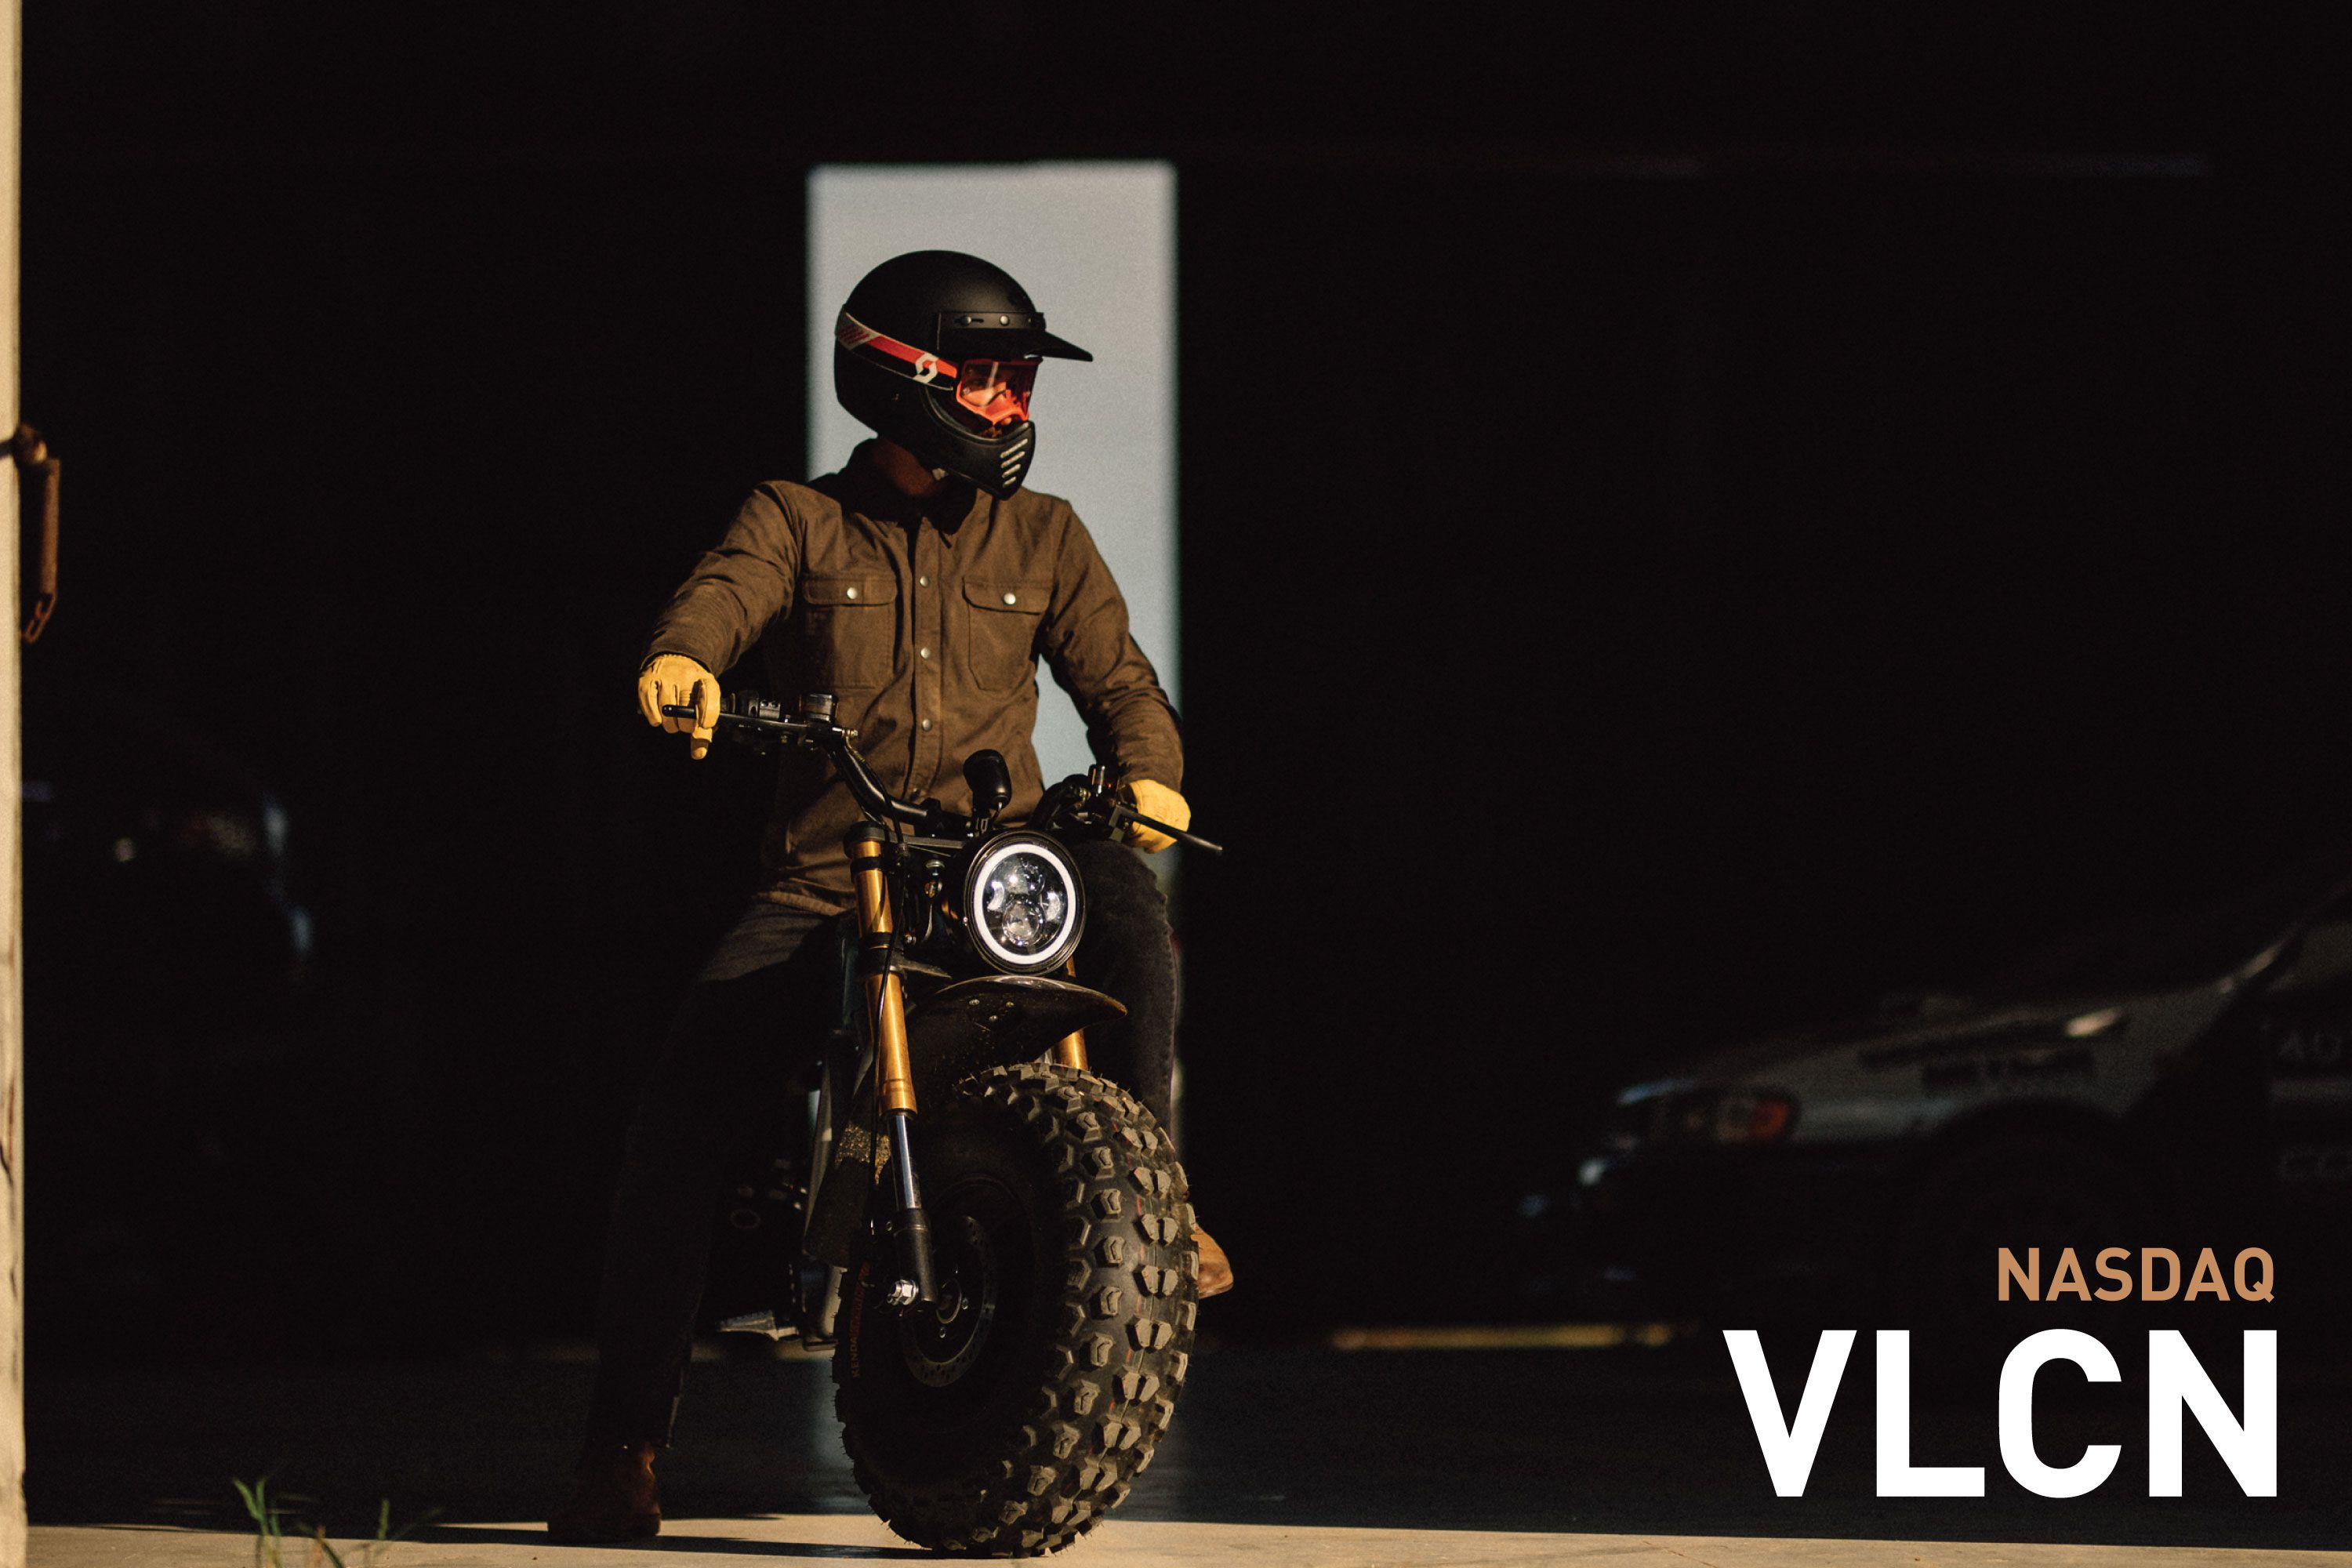 Volcon ePowersports, Inc., Monday, December 20, 2021, Press release picture